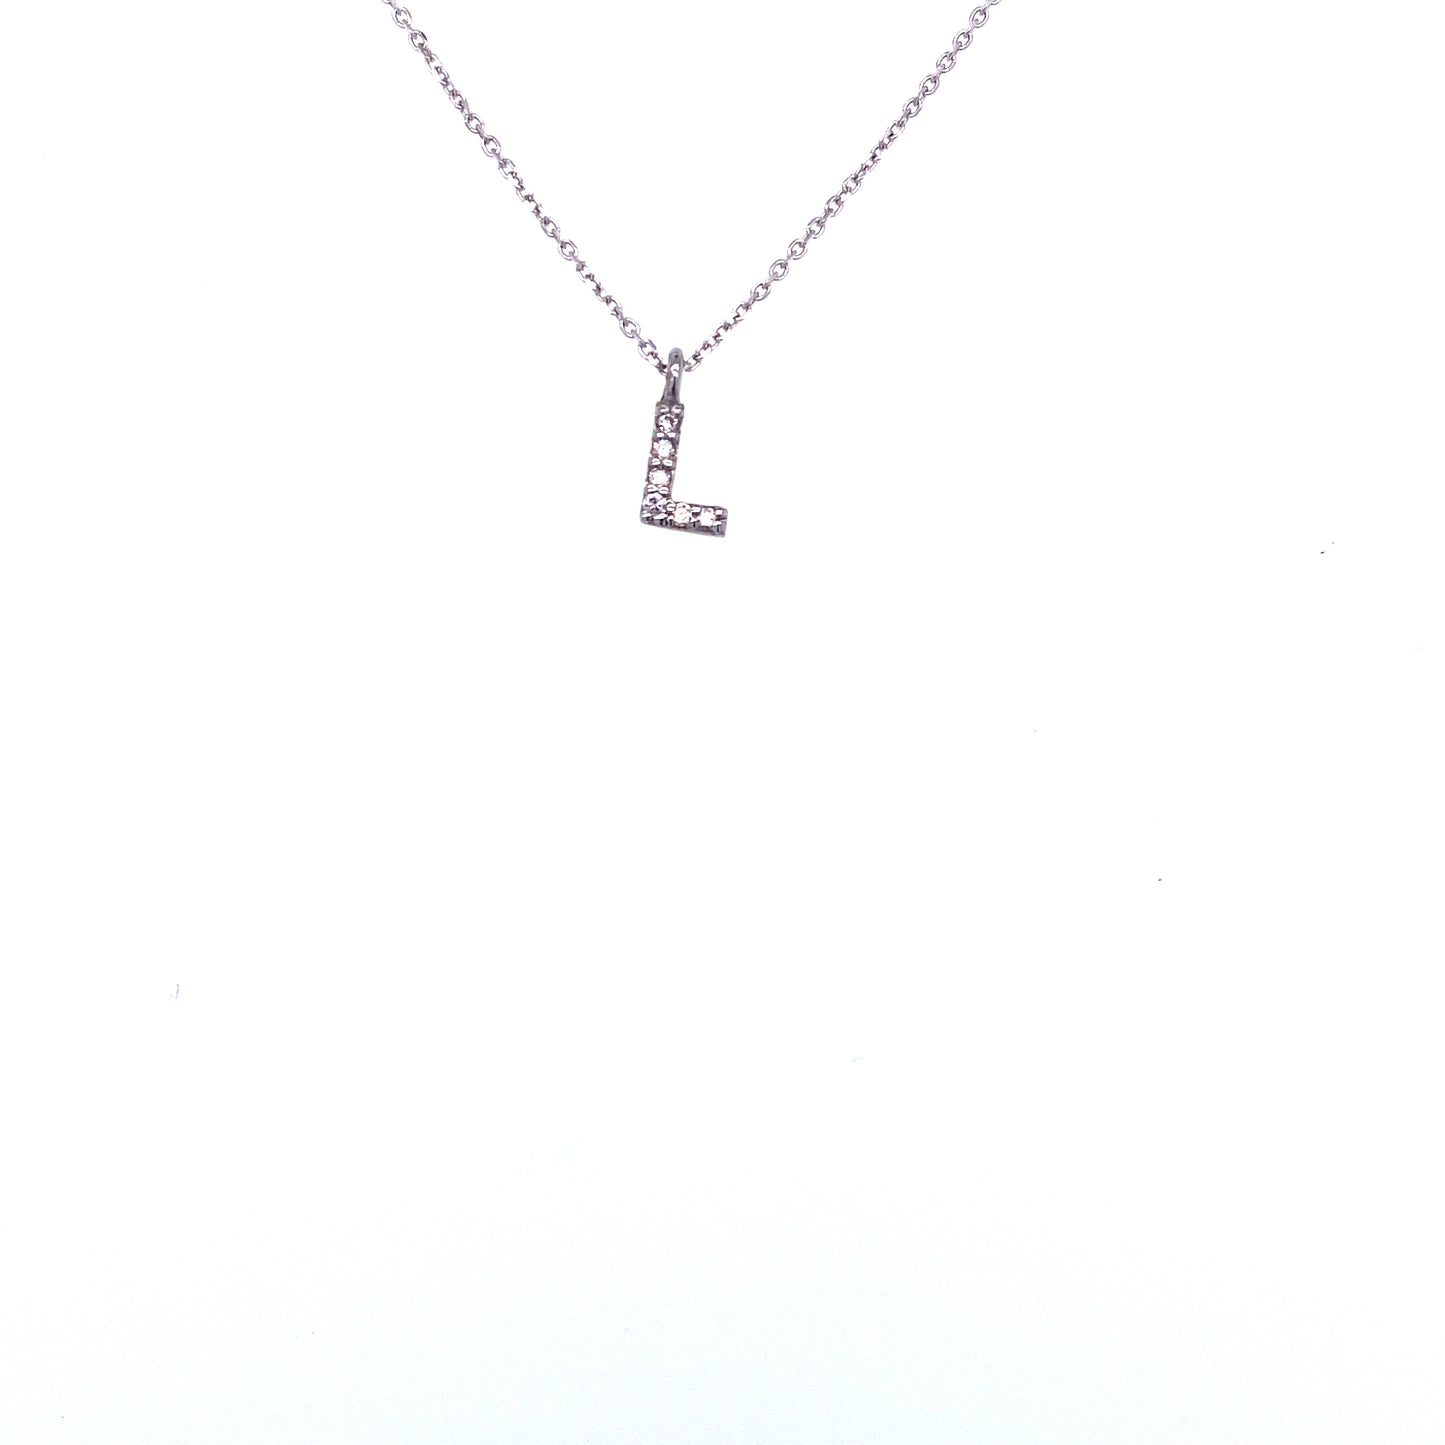 Necklace With Small Initial L and Diamond | Bernat Rubi | Luby 